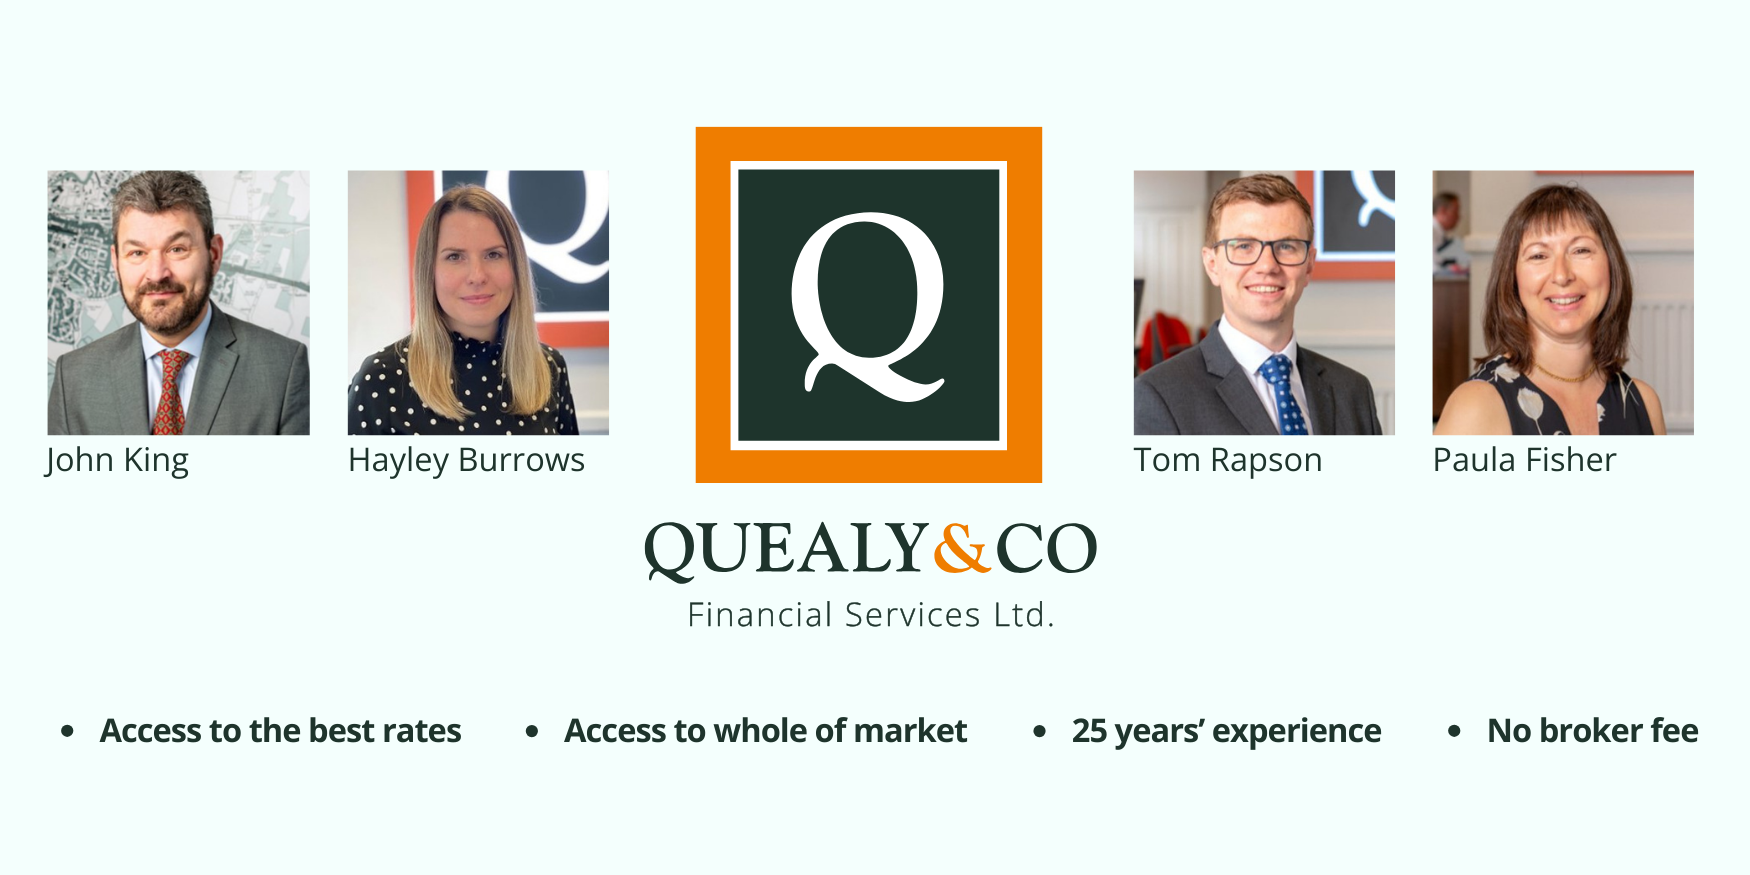 quealy and co financial services team